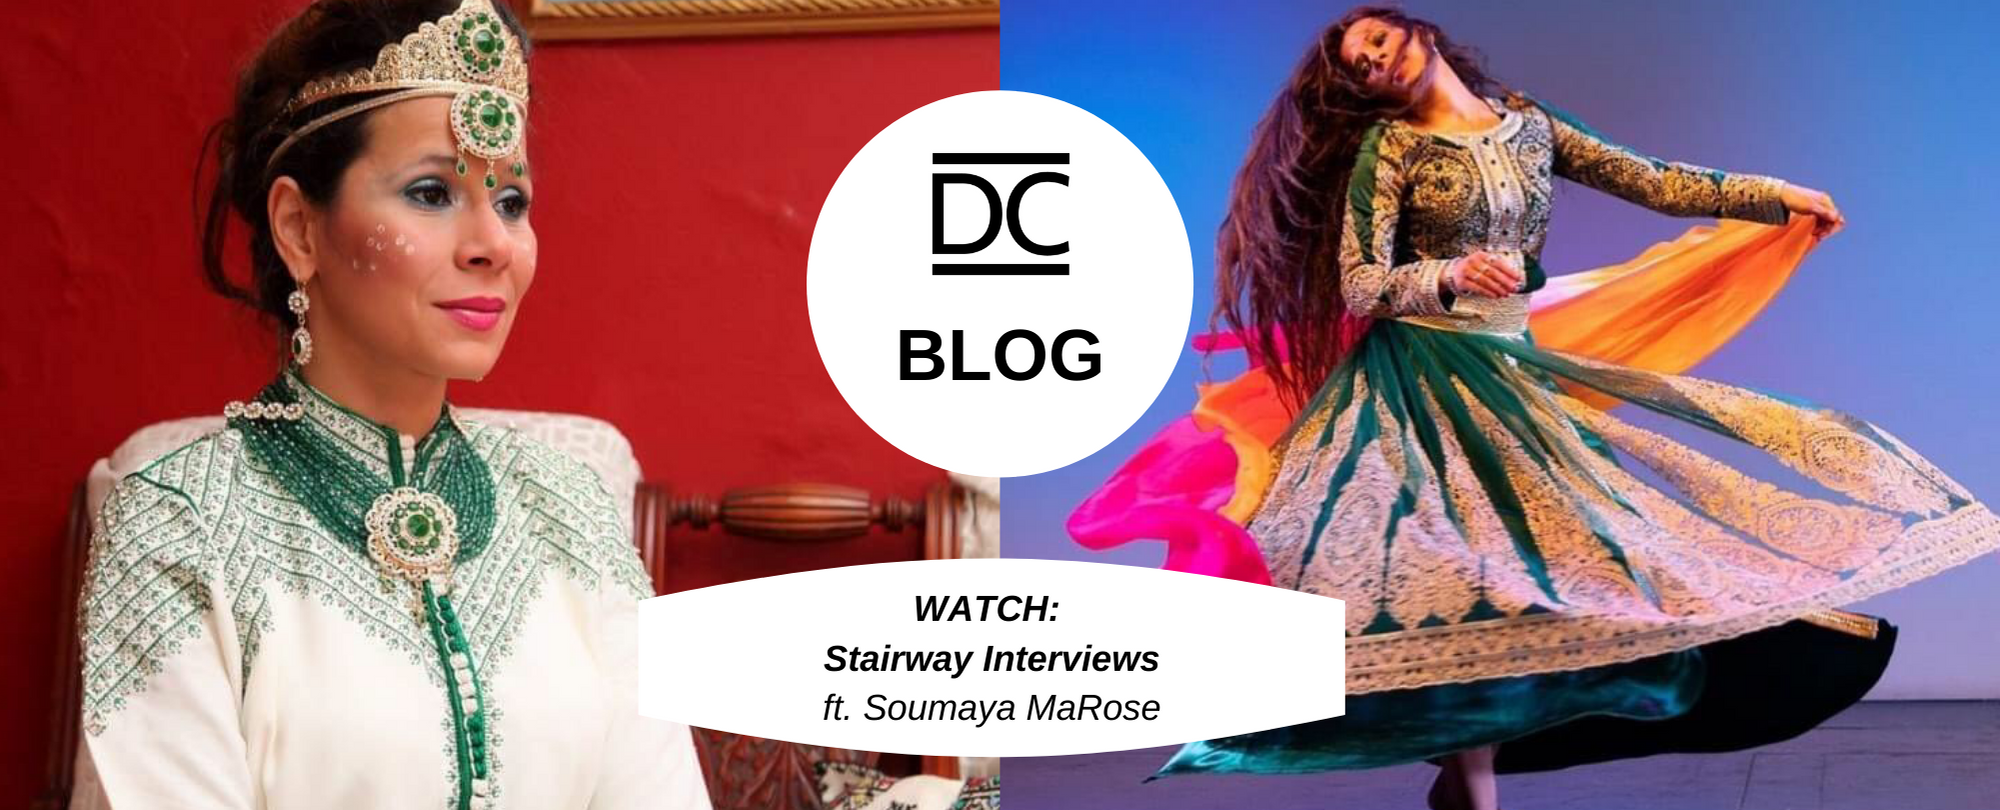 A Stairway Interview! with Soumaya Marose